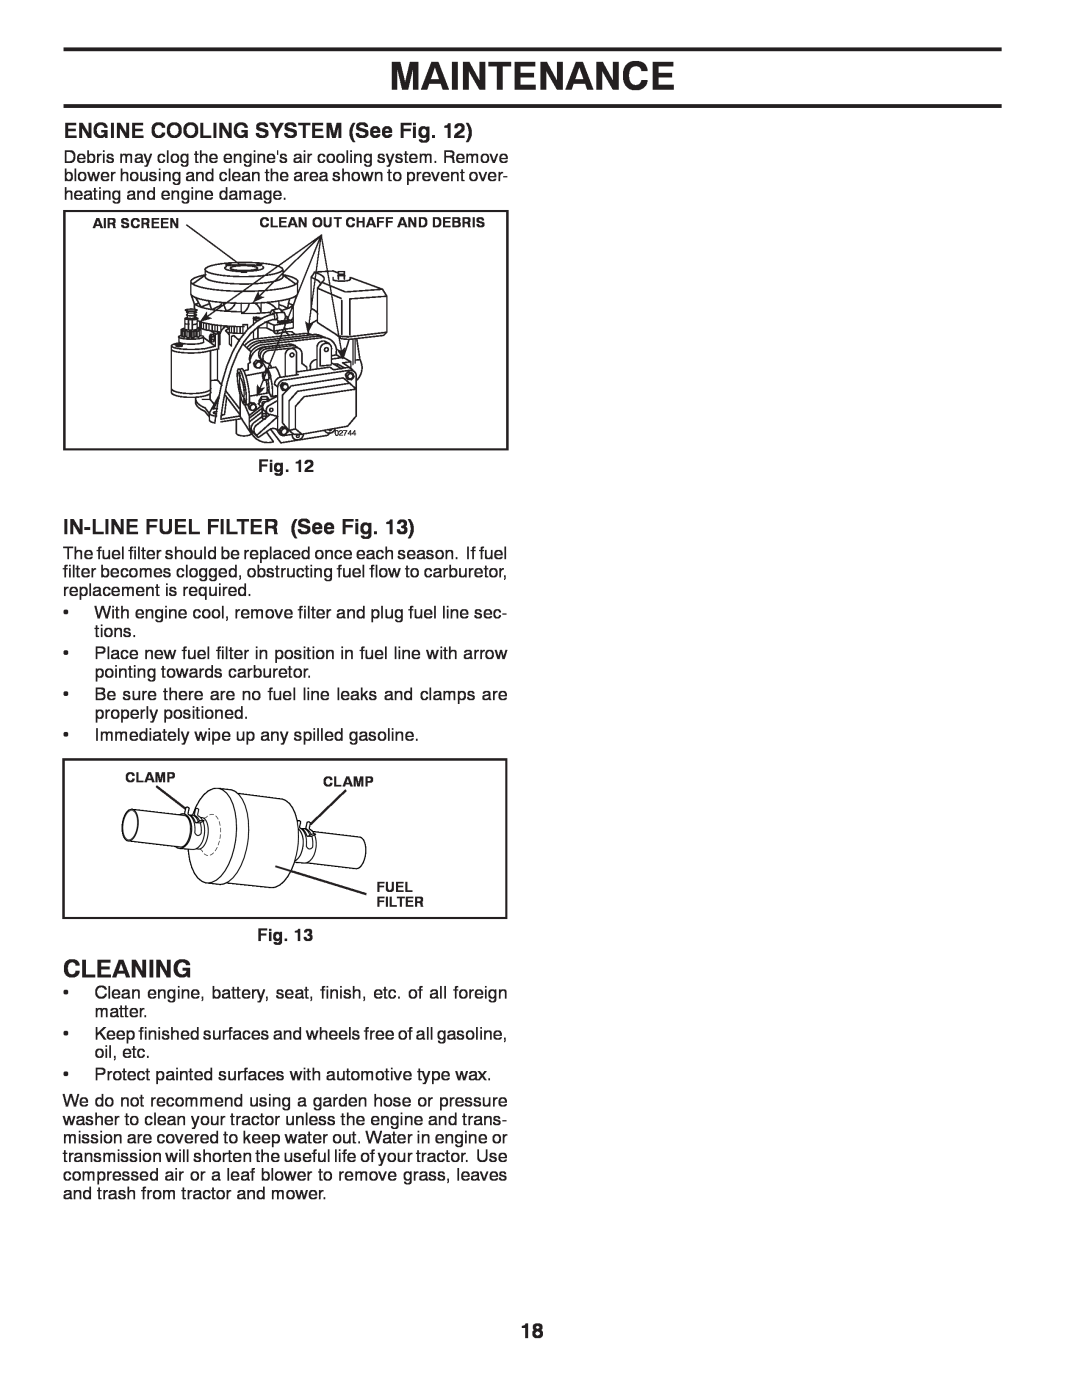 Poulan 532 43 88-98, 96018000400 manual Cleaning, ENGINE COOLING SYSTEM See Fig, IN-LINE FUEL FILTER See Fig, Maintenance 